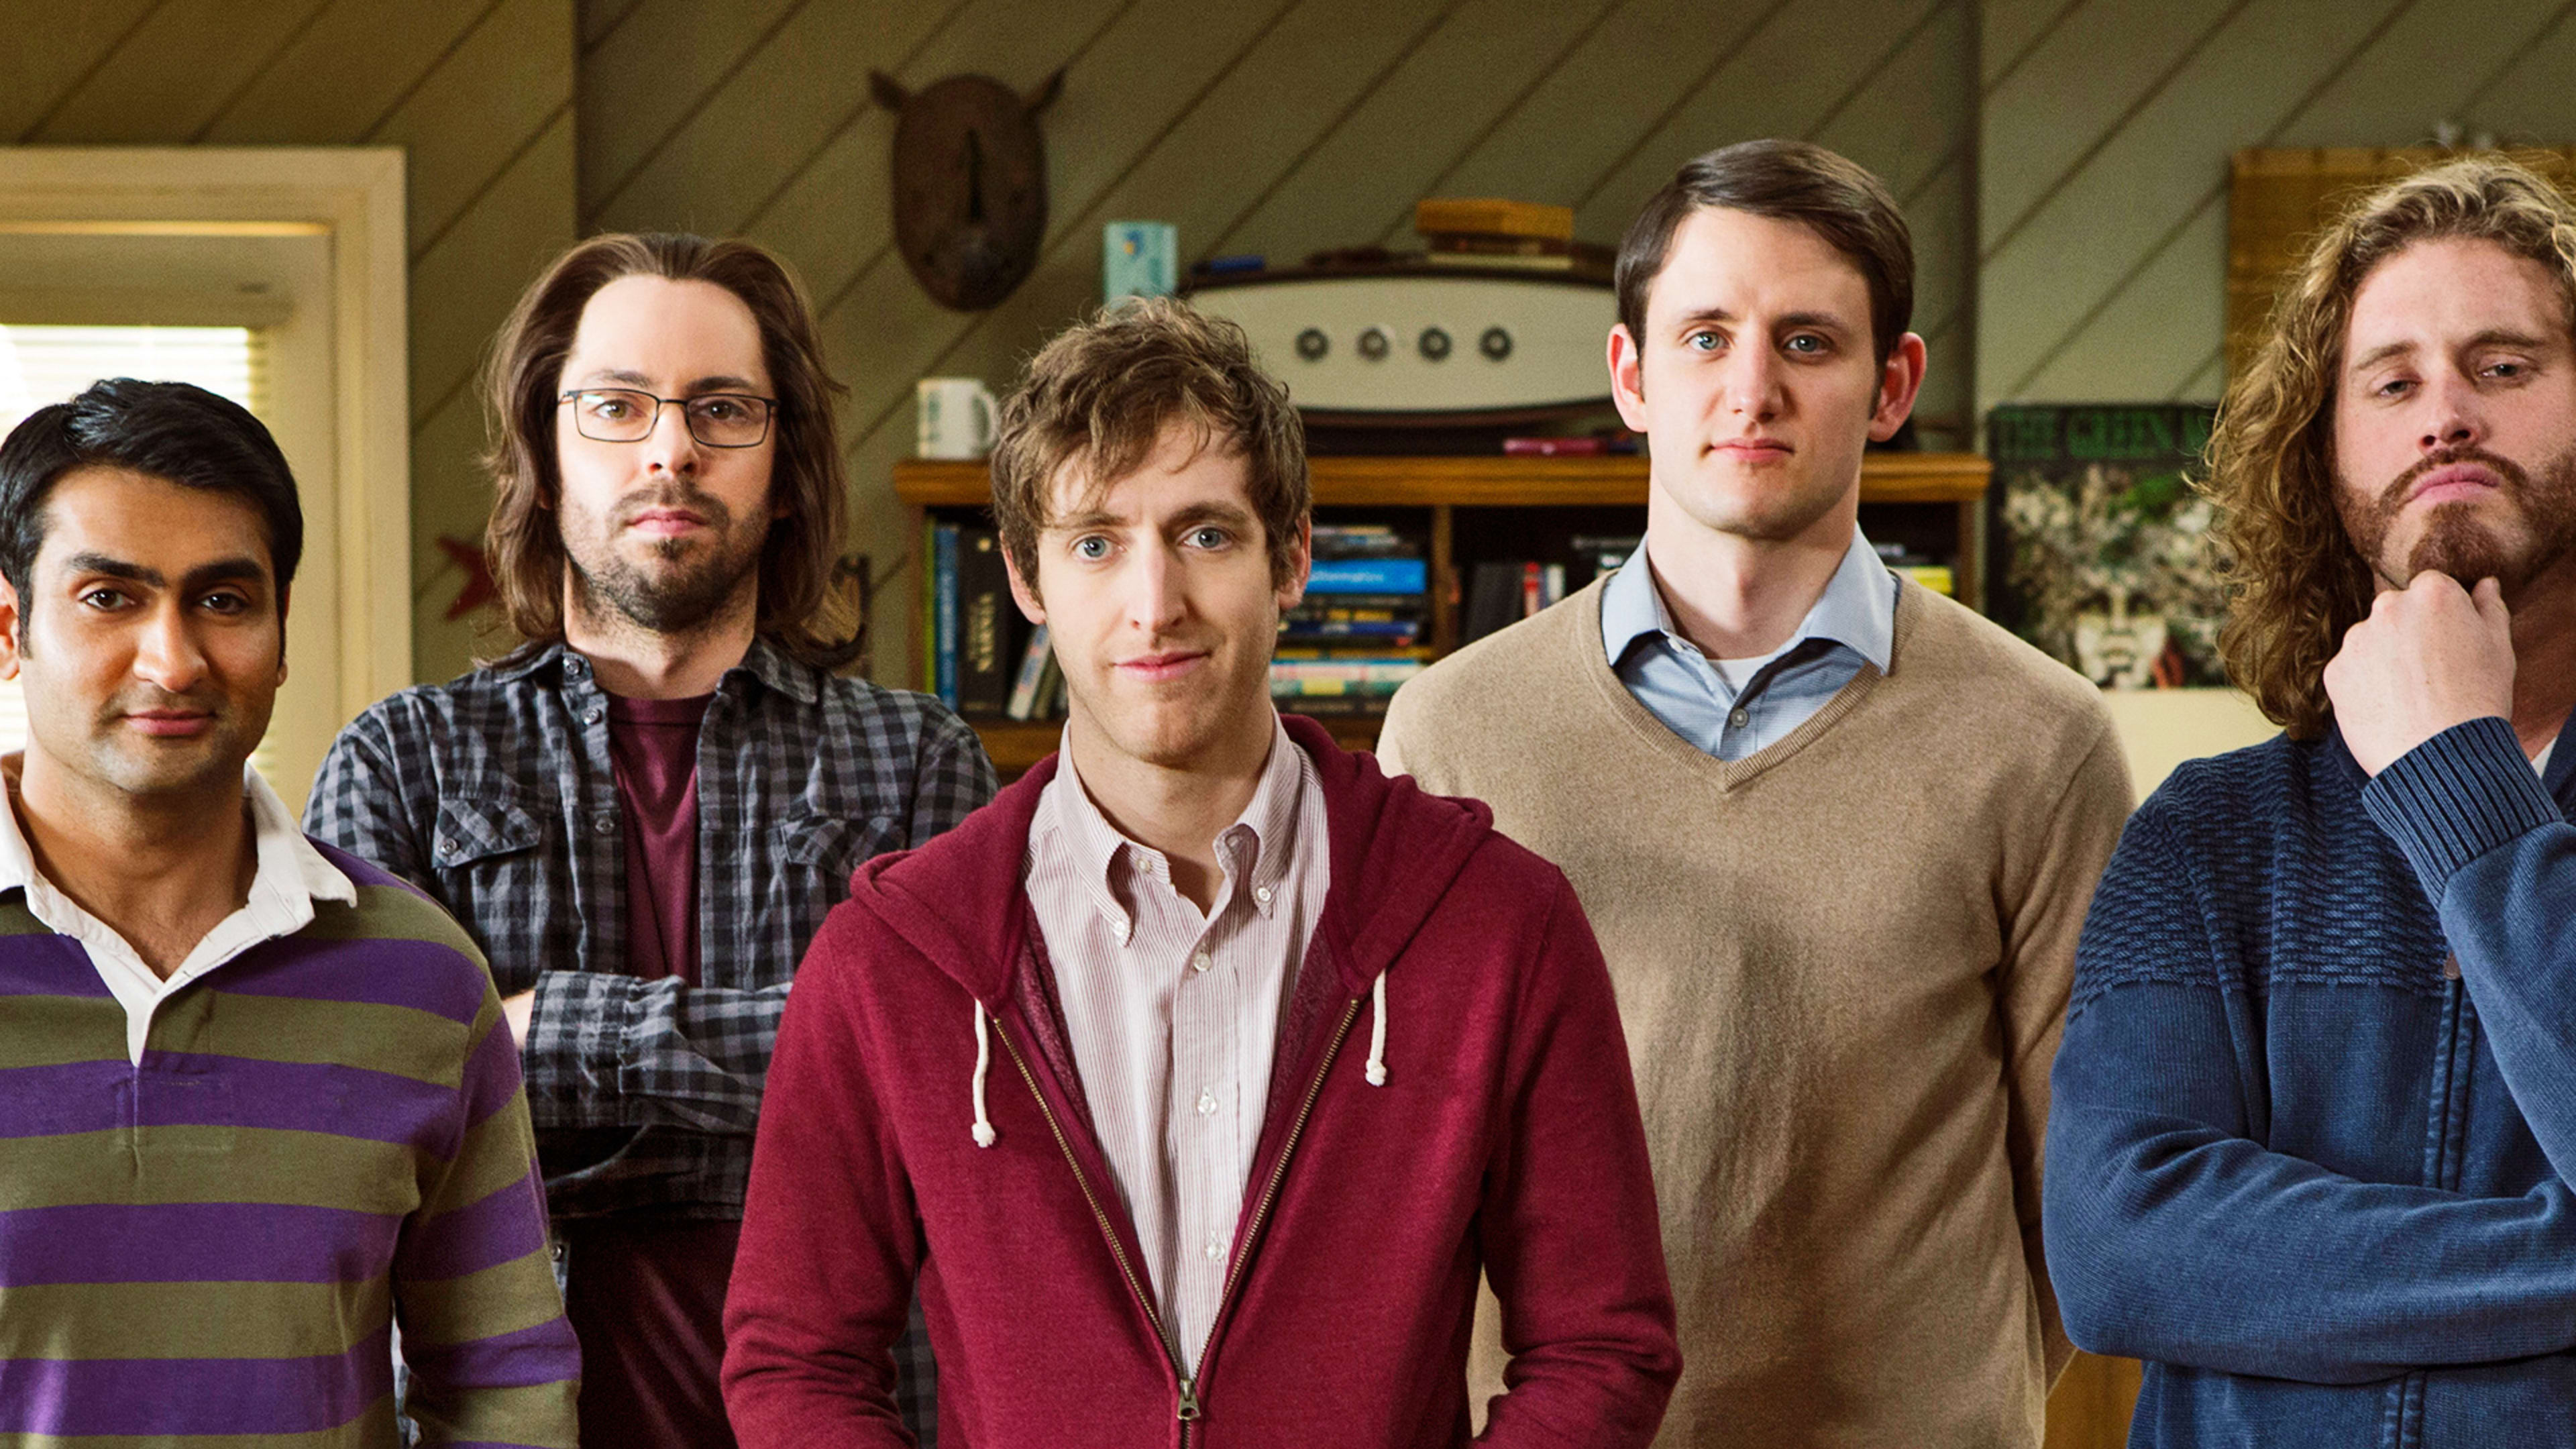 From “Freaks and Geeks” To HBO’s “Silicon Valley”: How Martin Starr Became A Geek God